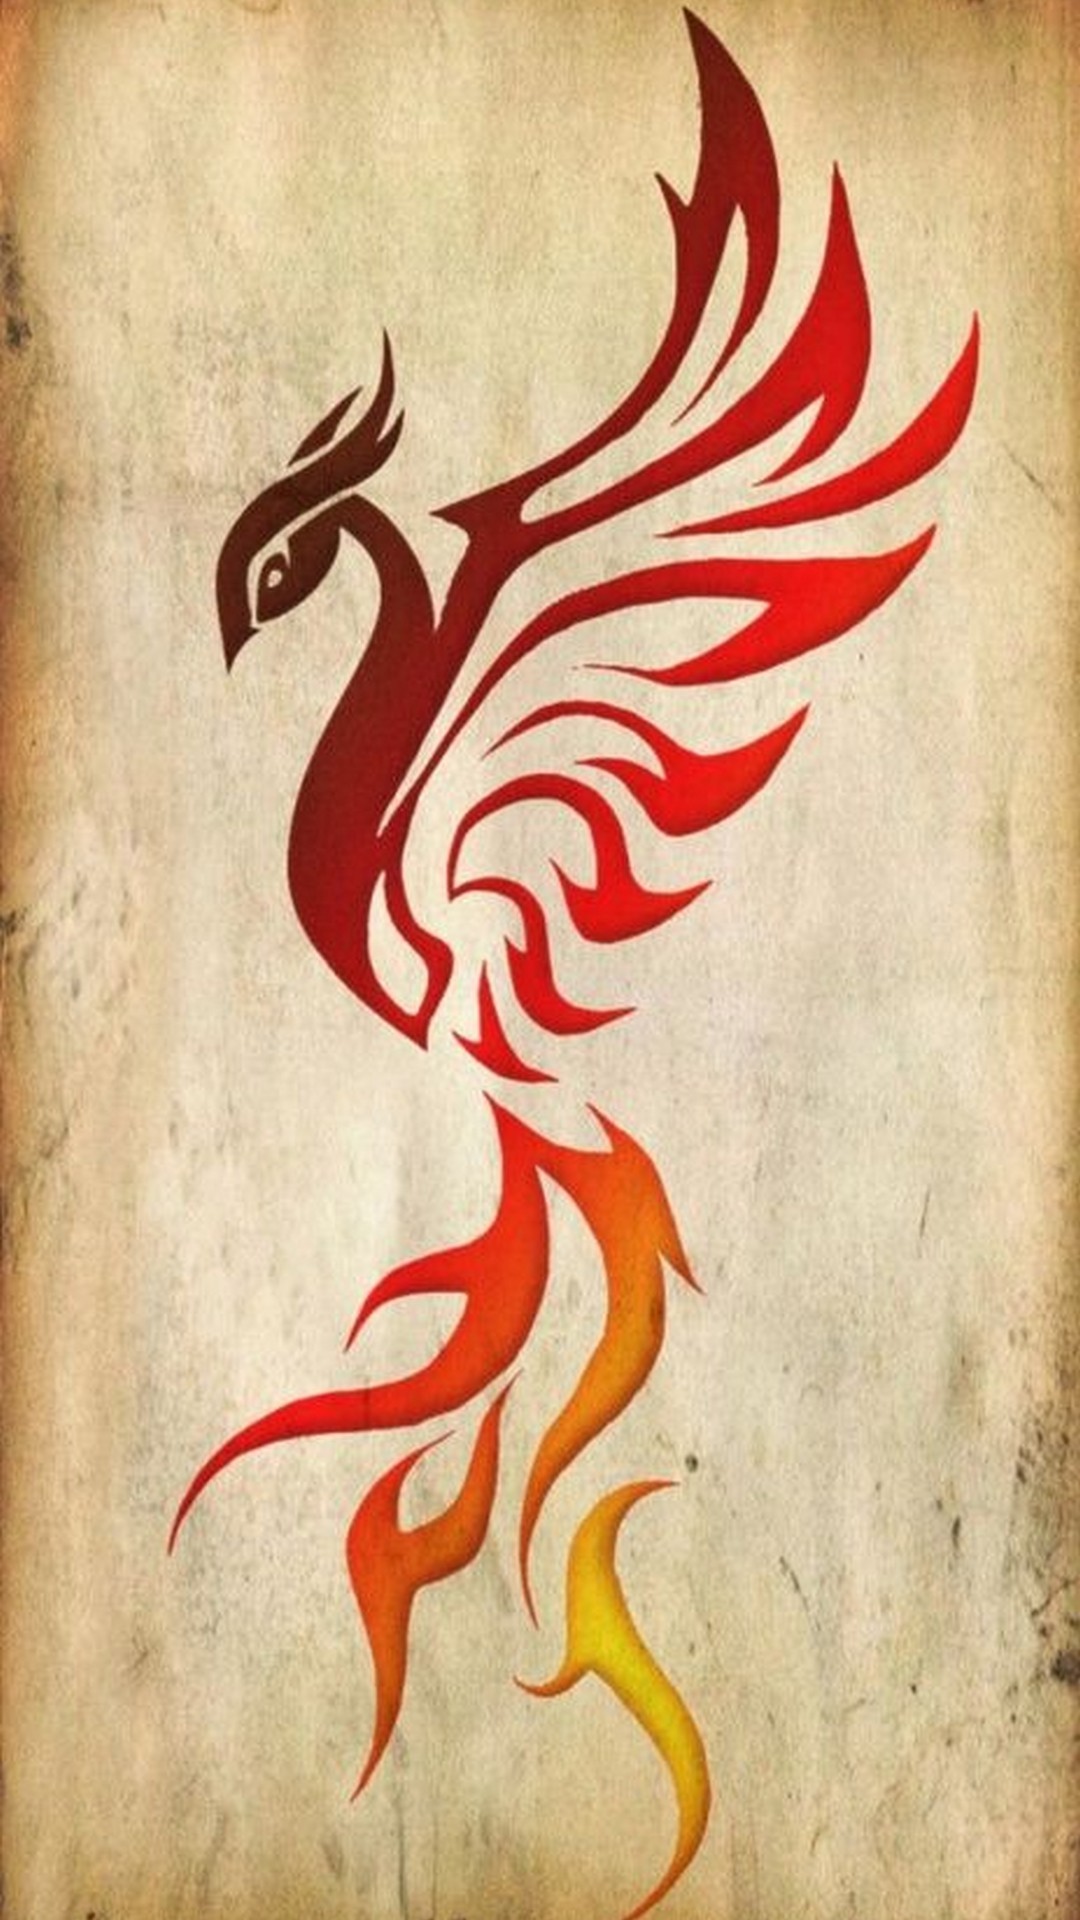 Wallpaper iPhone Phoenix with resolution 1080X1920 pixel. You can make this wallpaper for your iPhone 5, 6, 7, 8, X backgrounds, Mobile Screensaver, or iPad Lock Screen